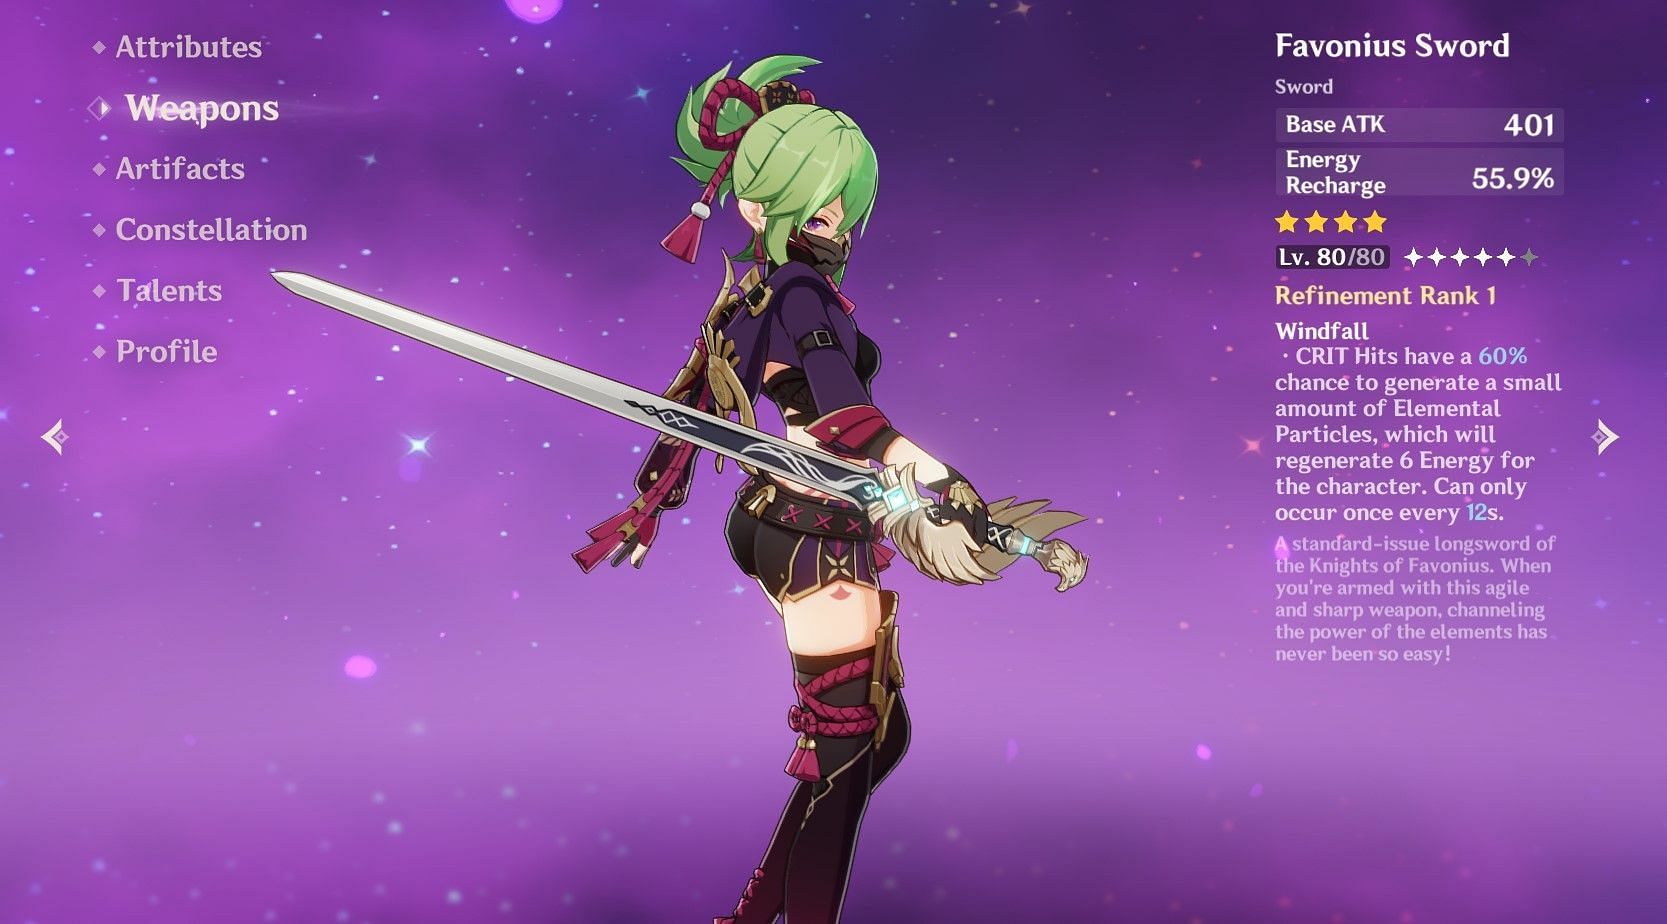 Her Test Run features her using a Favonius Sword, which is great for support builds (Image via HoYoverse)